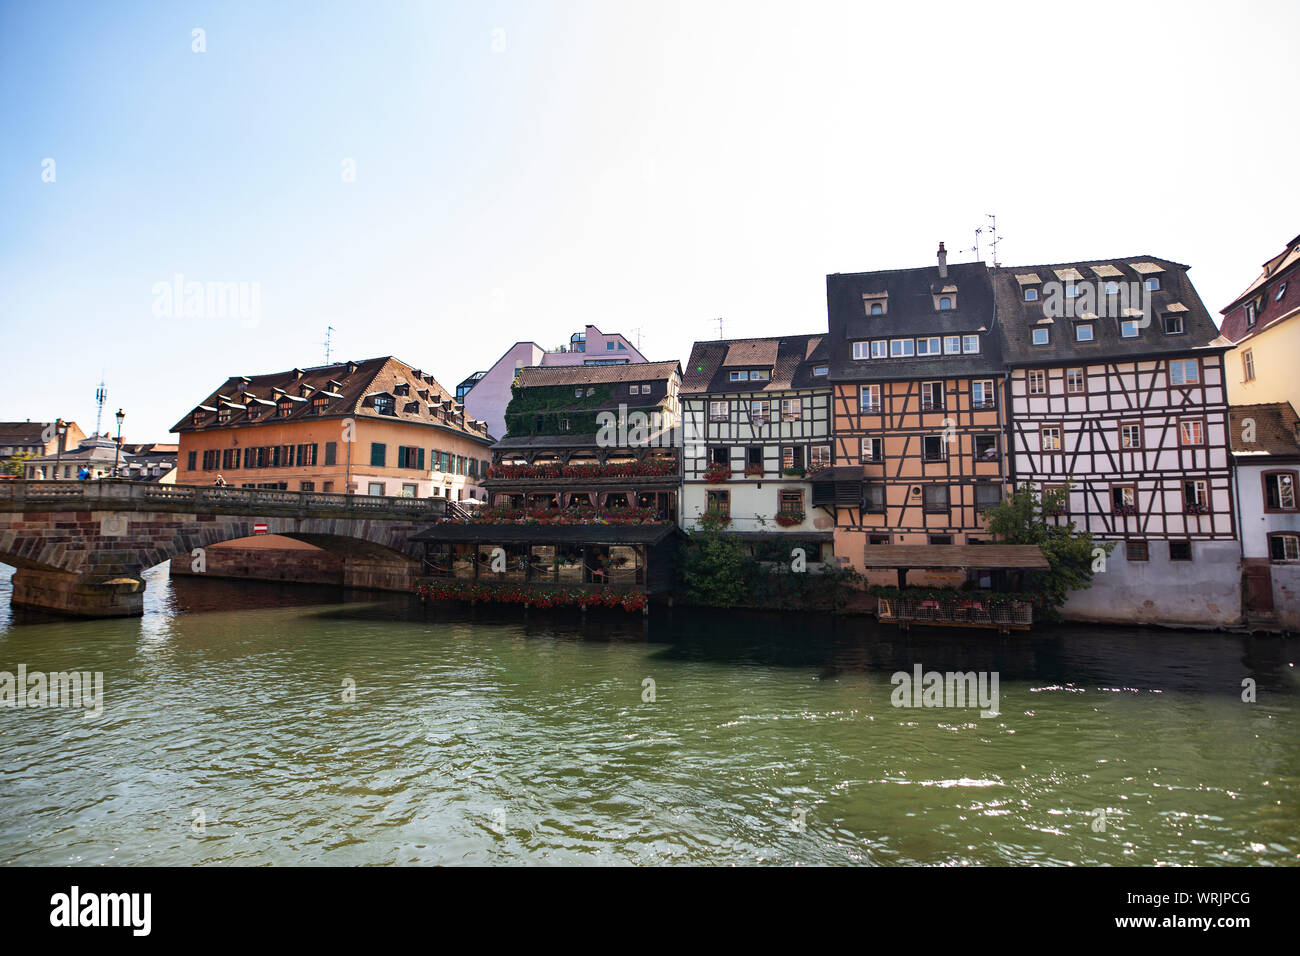 The Pont St Martin crosses the canal amid traditional historic buildings in the Petite France area of Strasbourg, France. Stock Photo